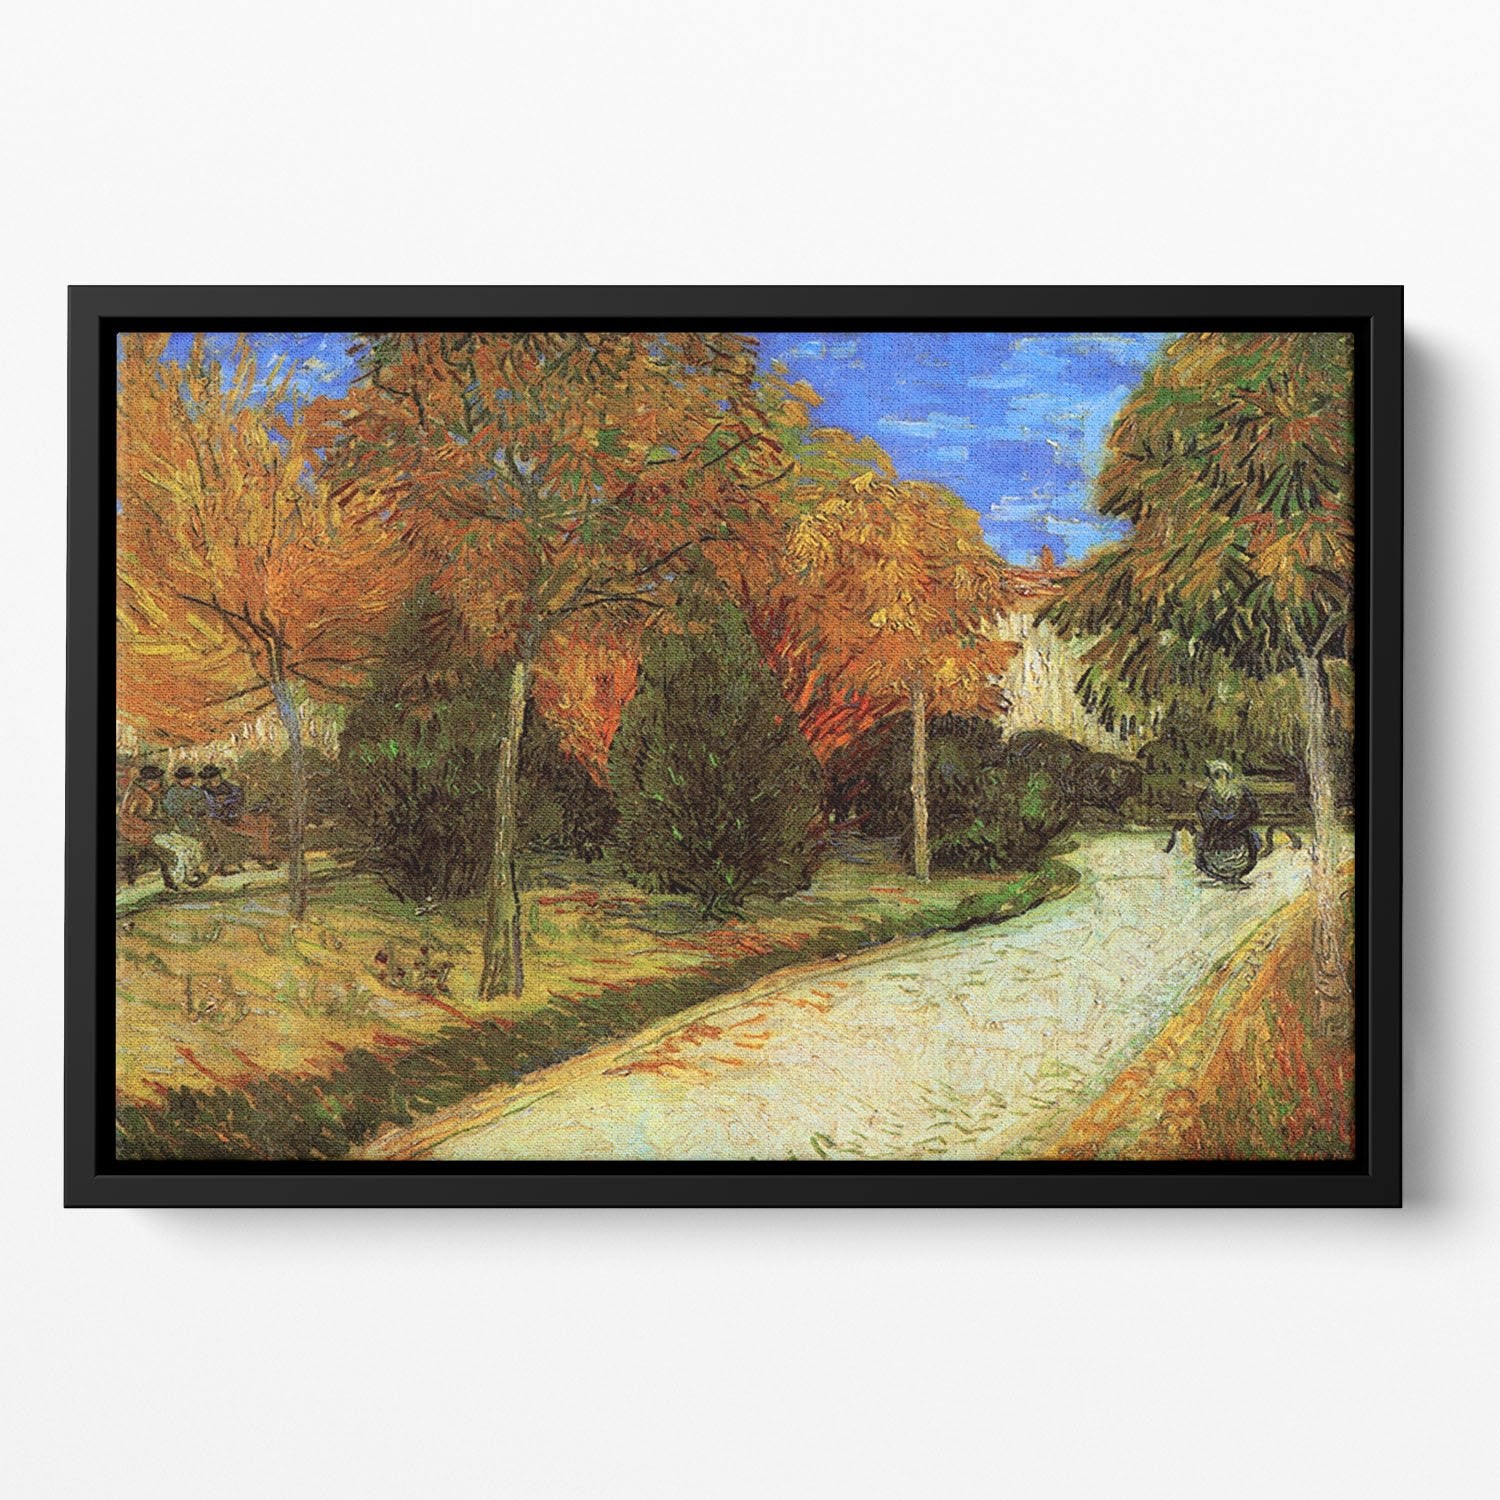 The Public Park at Arles by Van Gogh Floating Framed Canvas